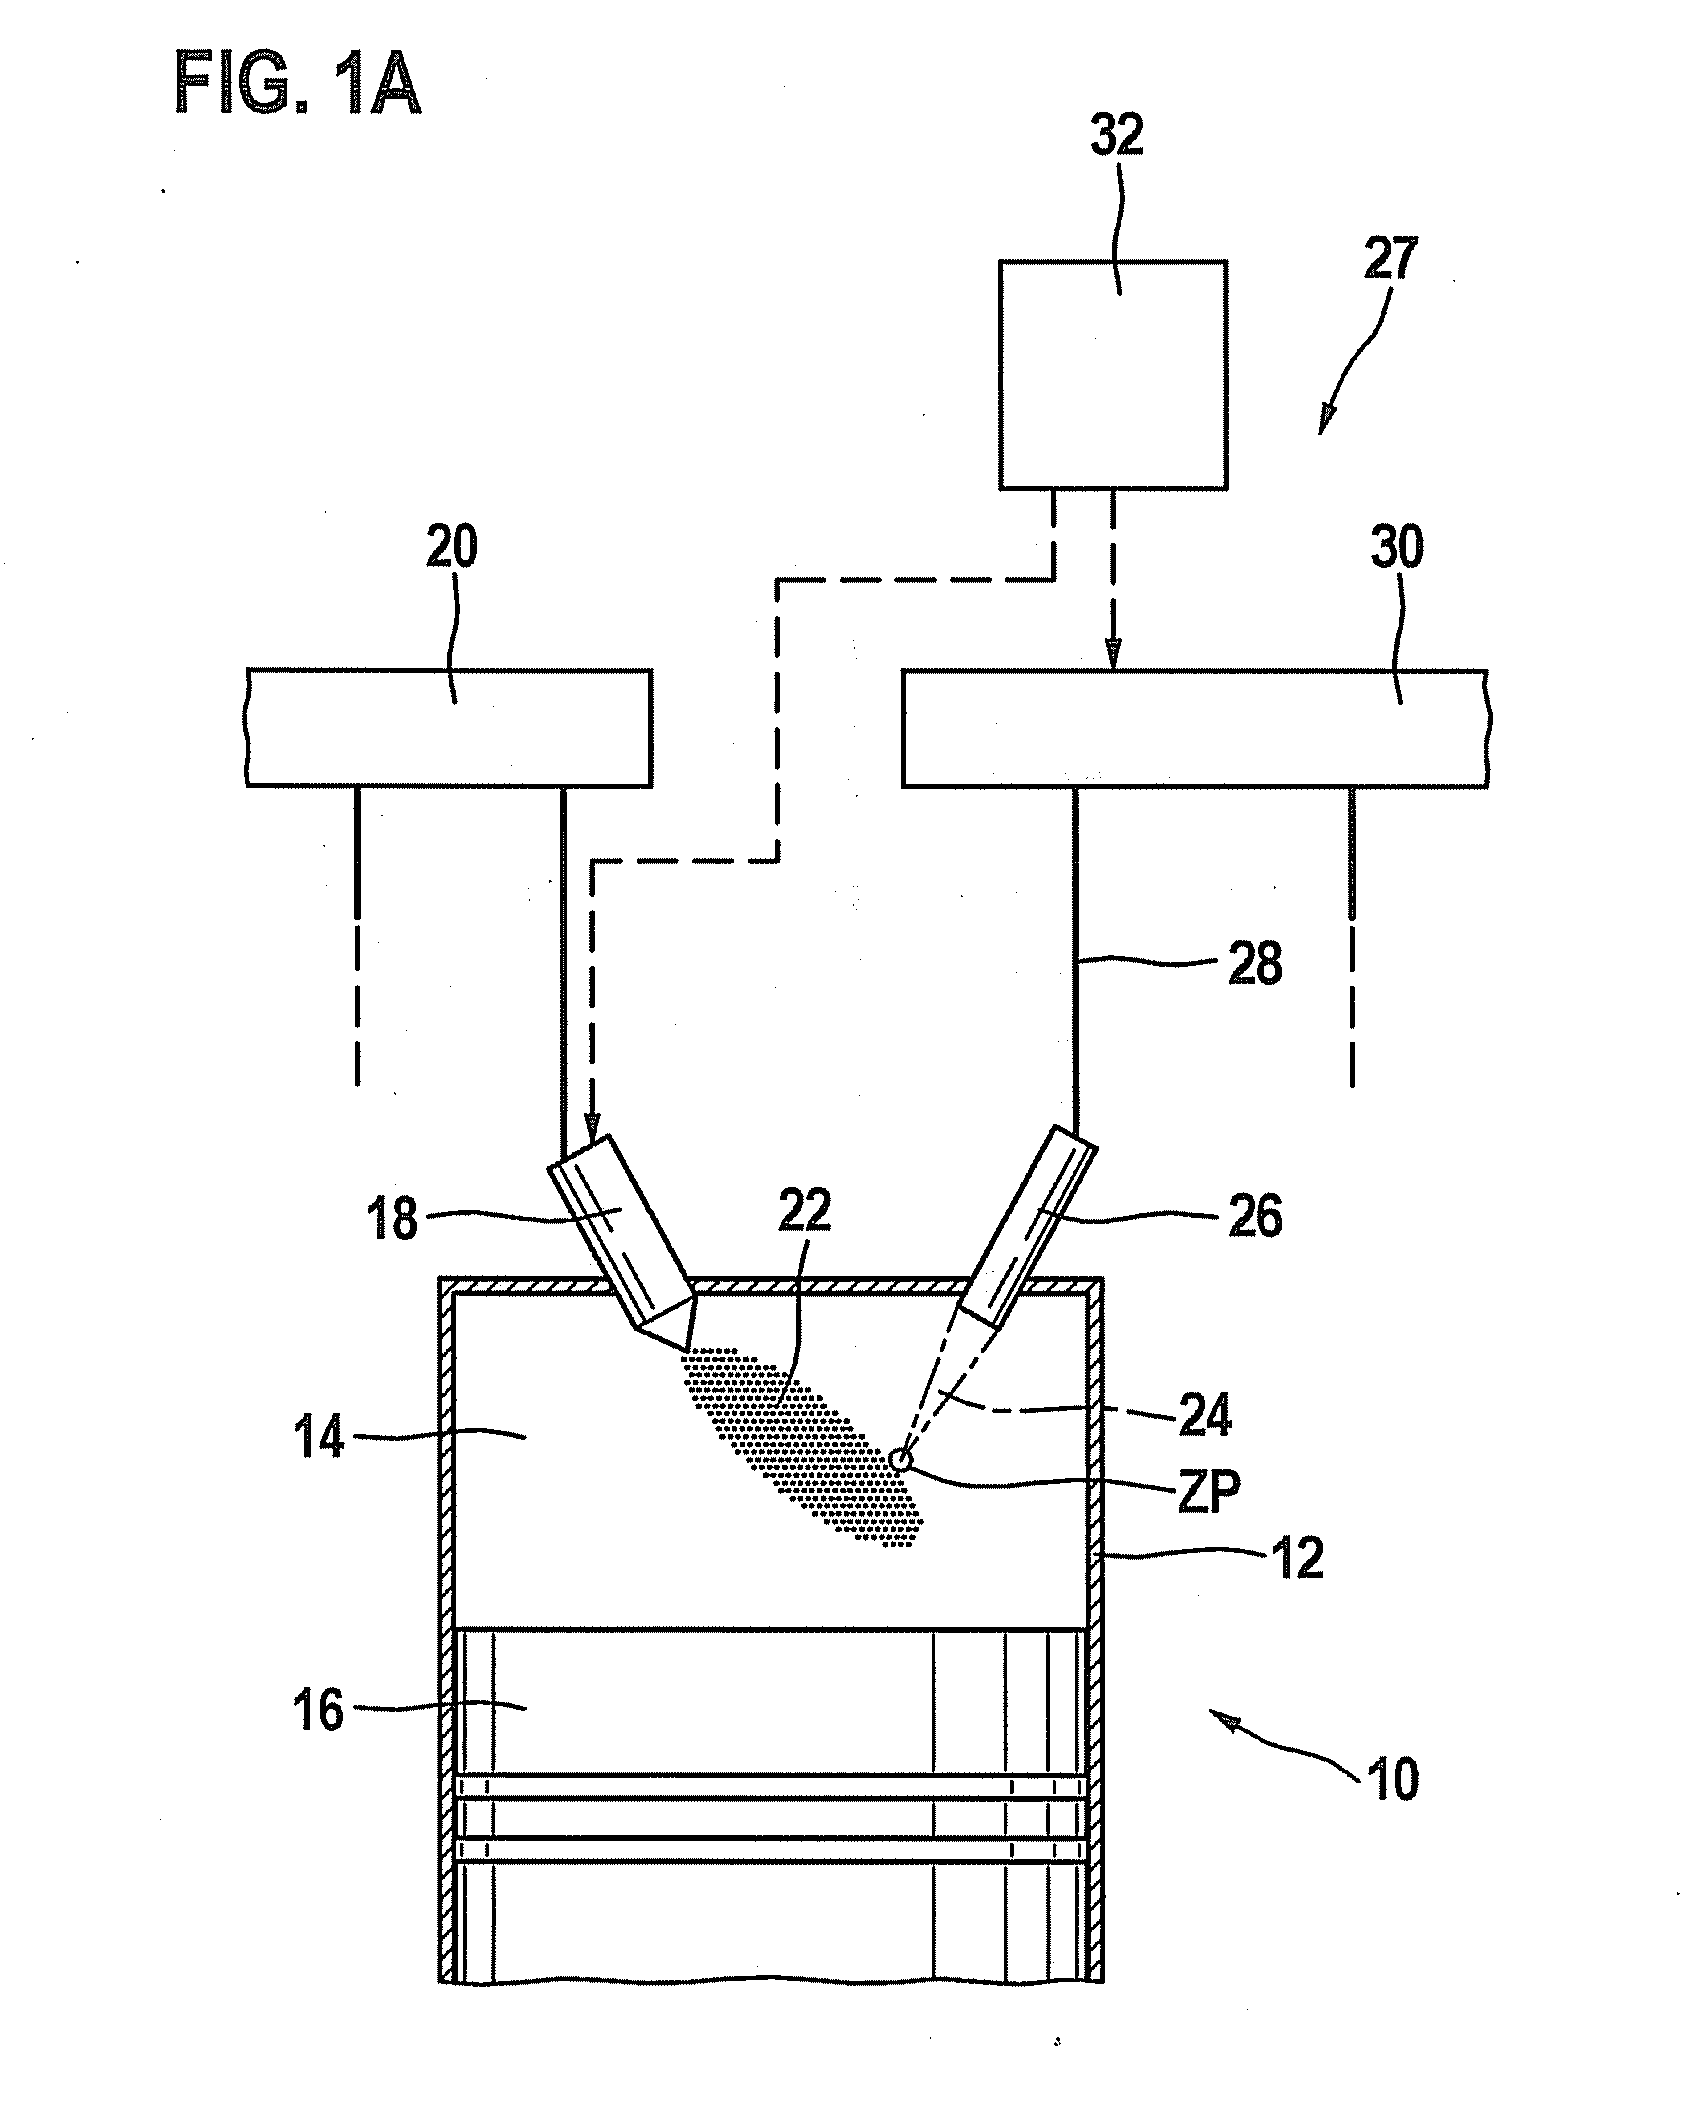 Gas engine having a laser ignition device